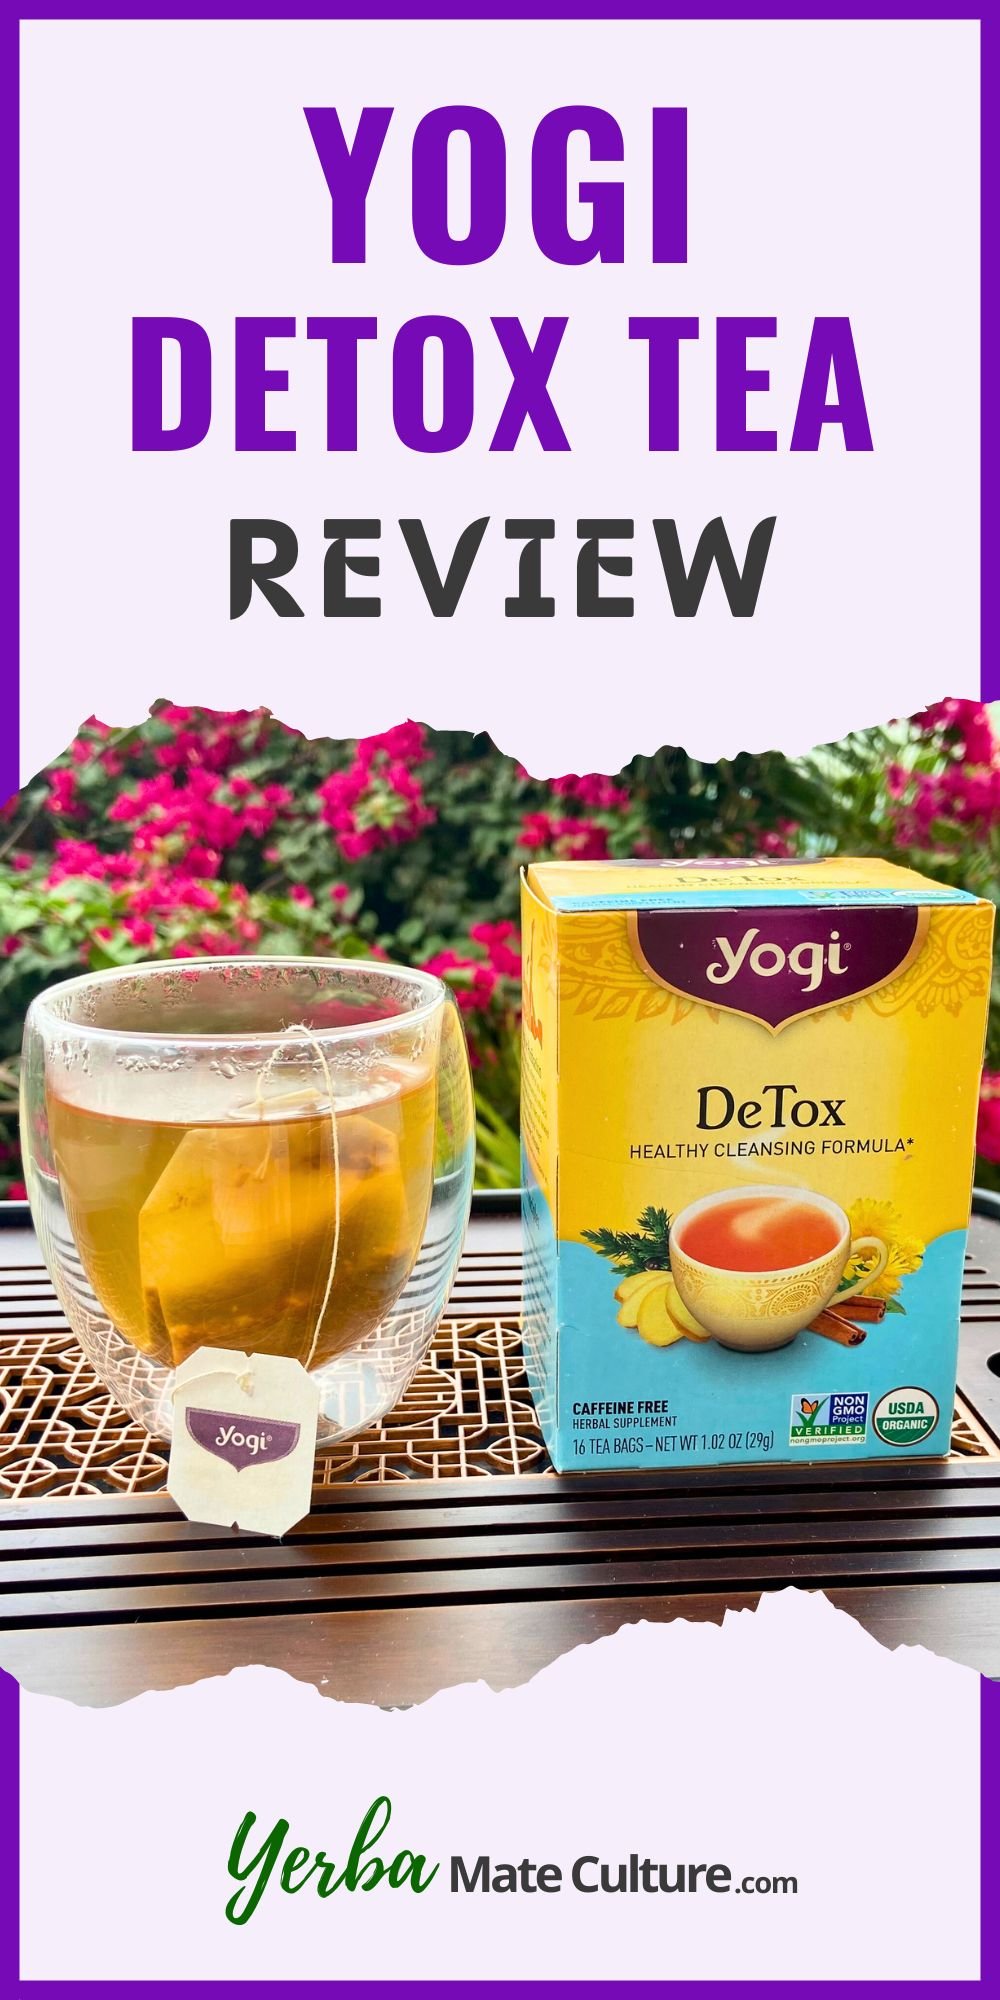 Yogi Detox Tea Review Benefits and Side Effects